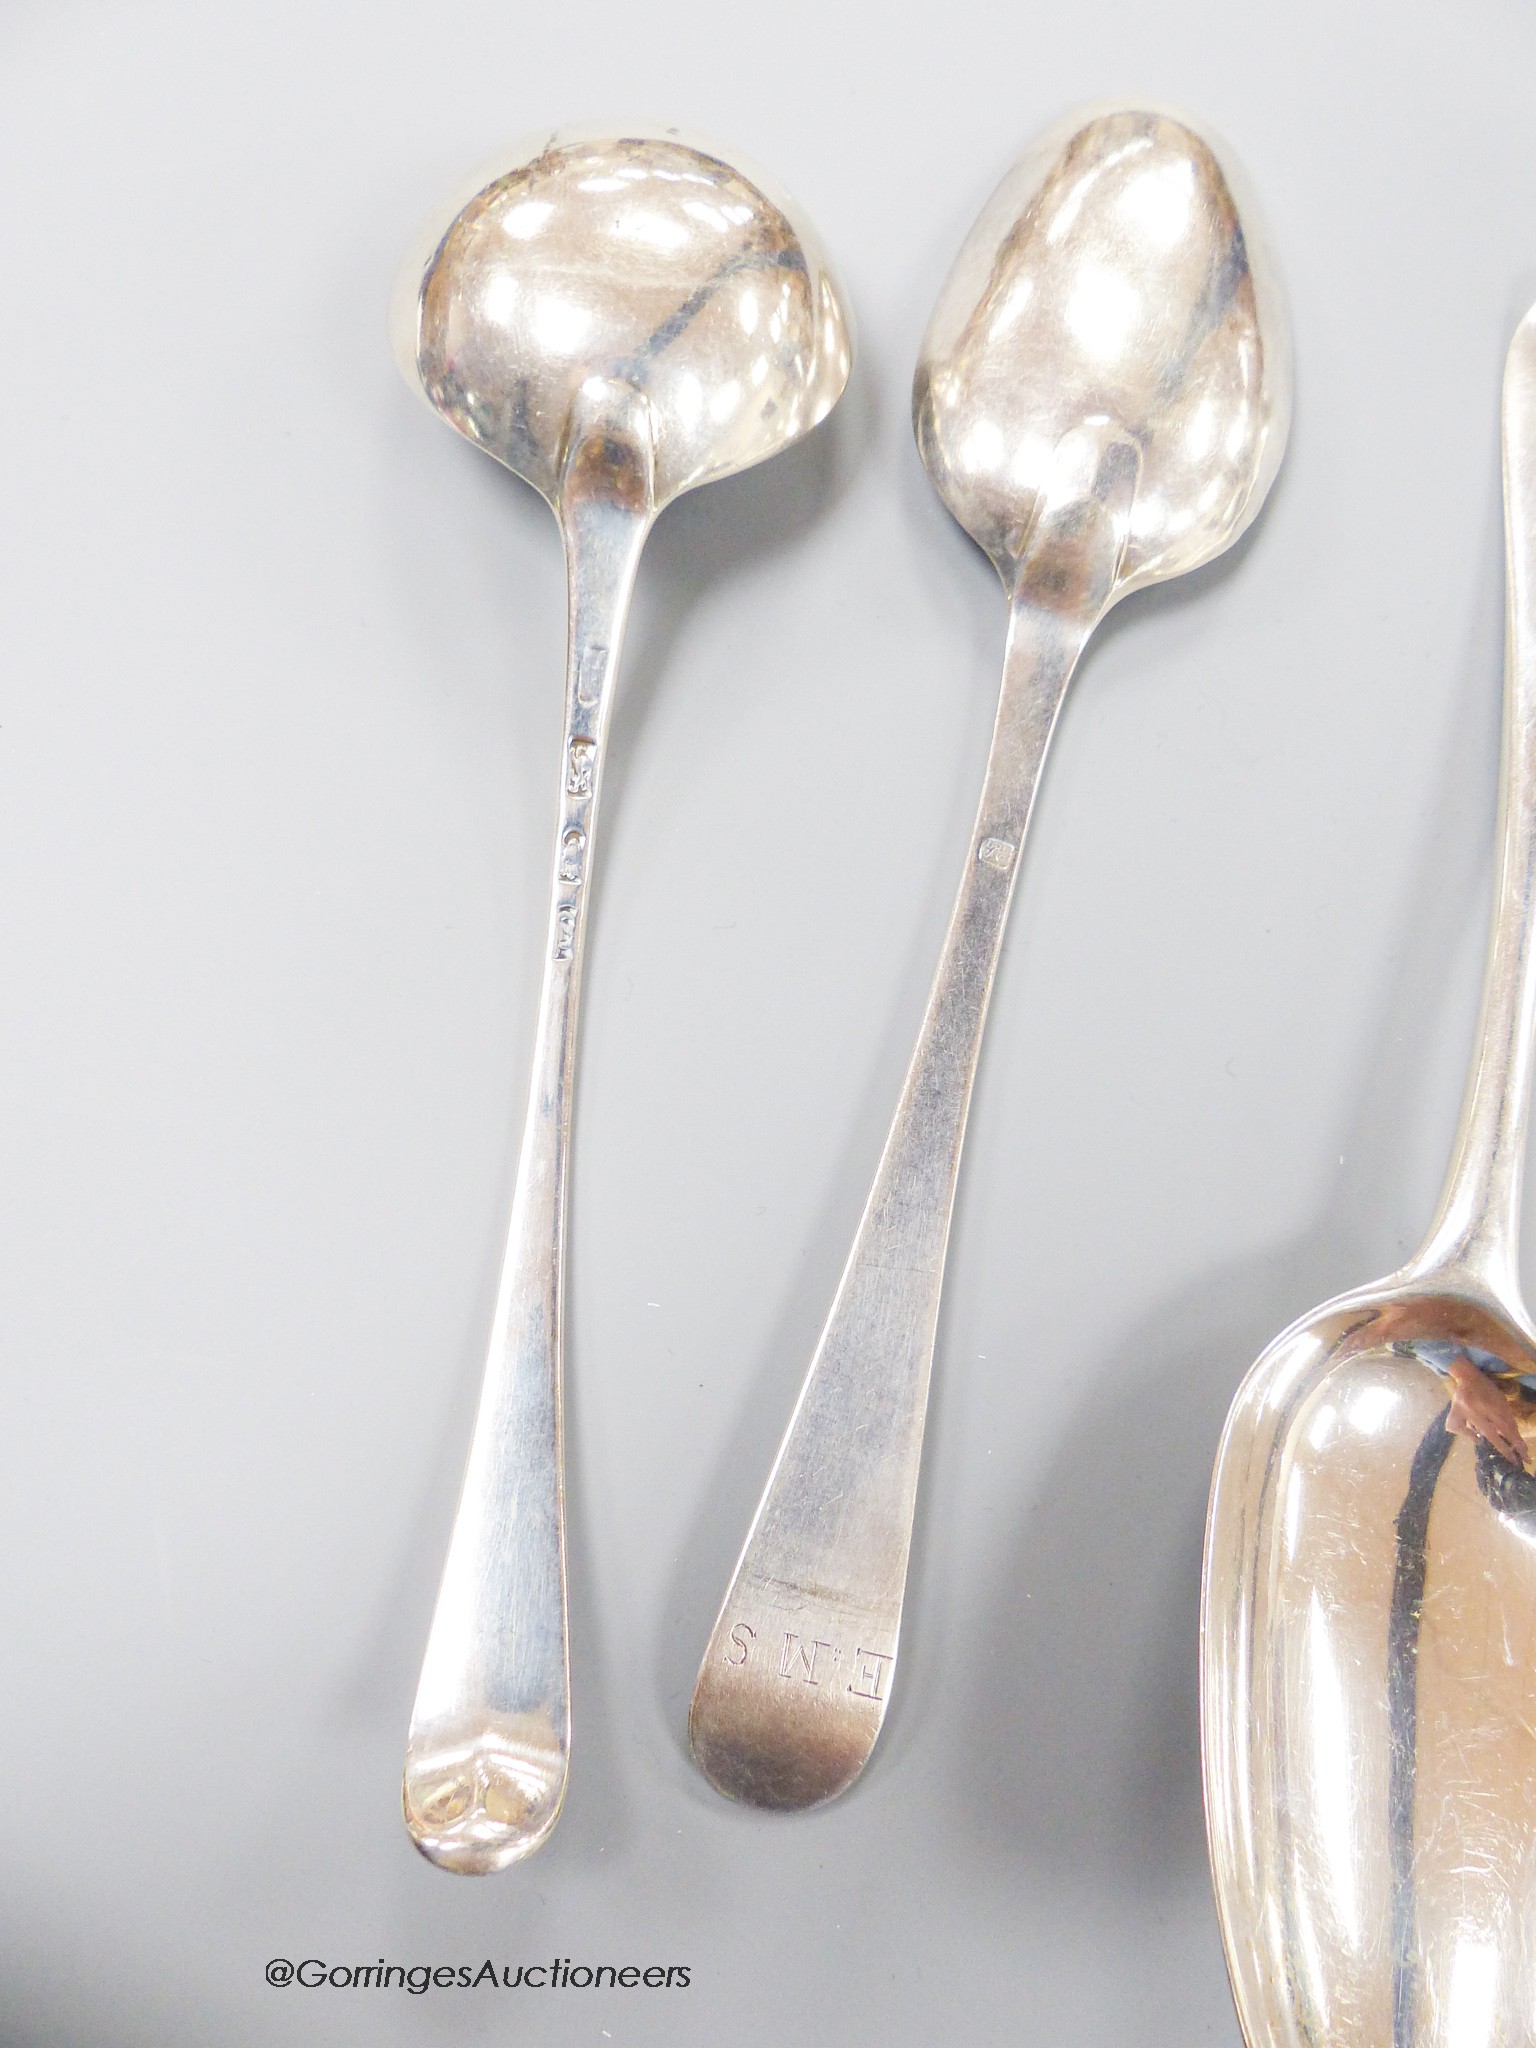 Ten assorted 18th century silver tablespoons and a similar sauce ladle, various pattern, dates and makers and six 19th century continental white metal tablespoons, gross 32.5oz.